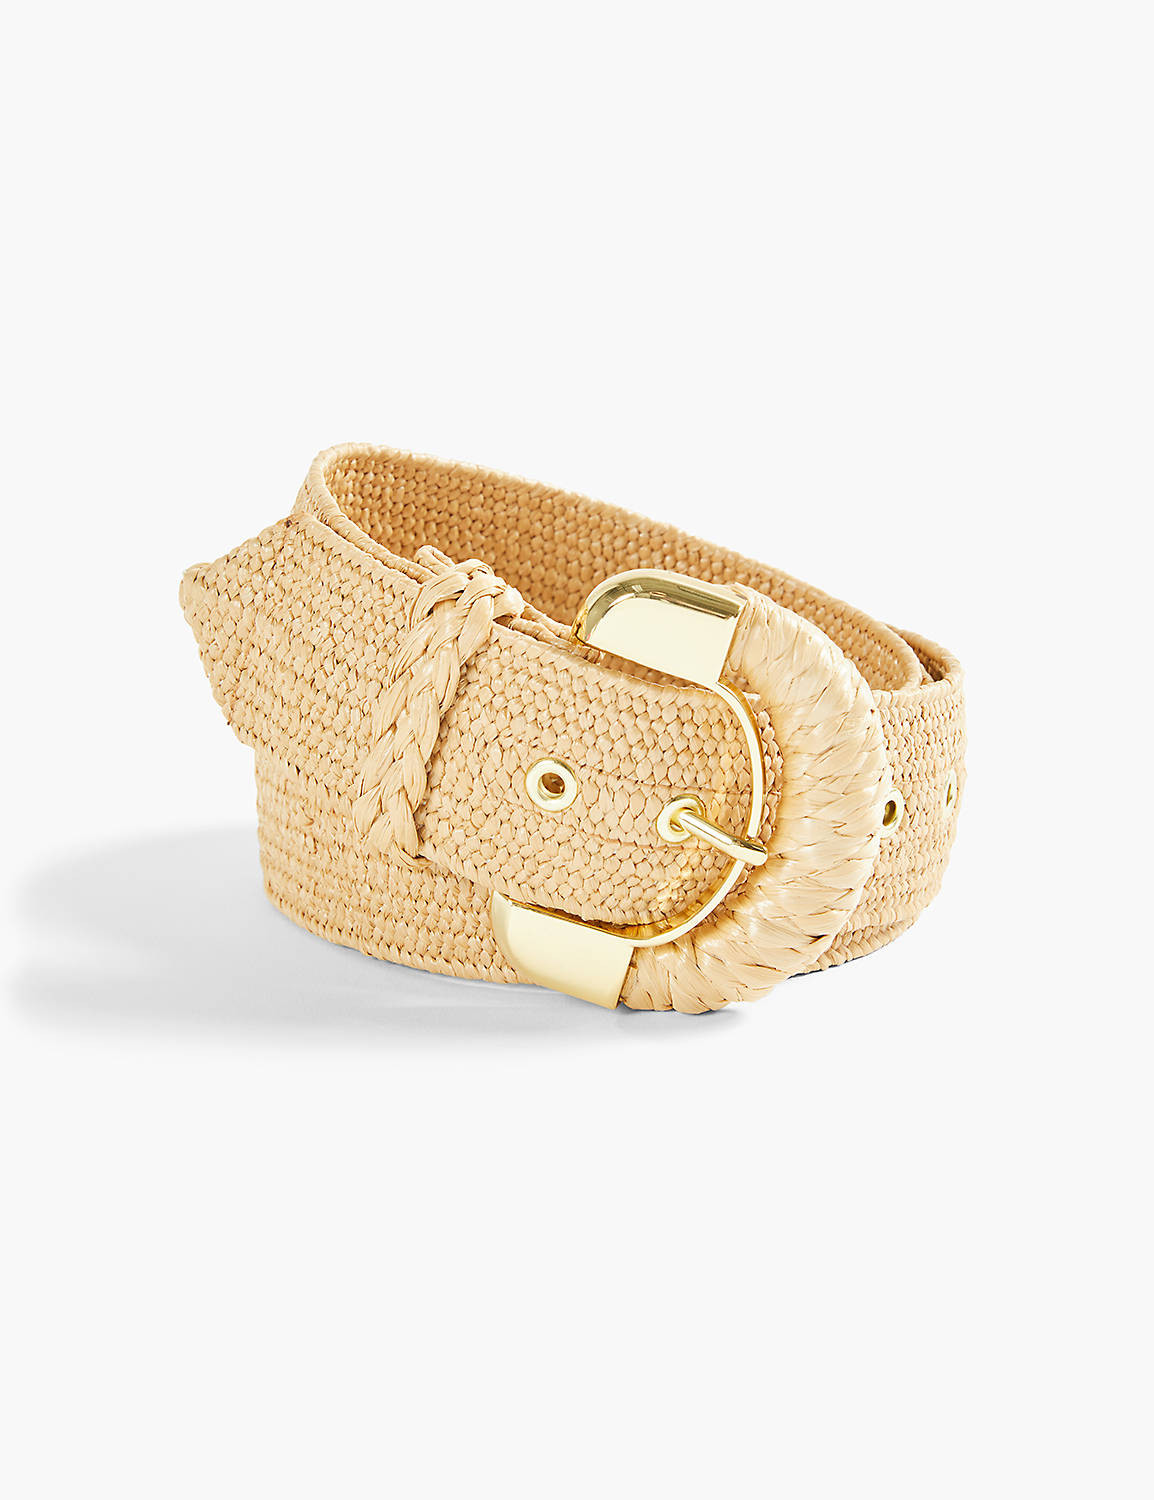 WRAPPED BUCKLE STRAW BELT Product Image 1